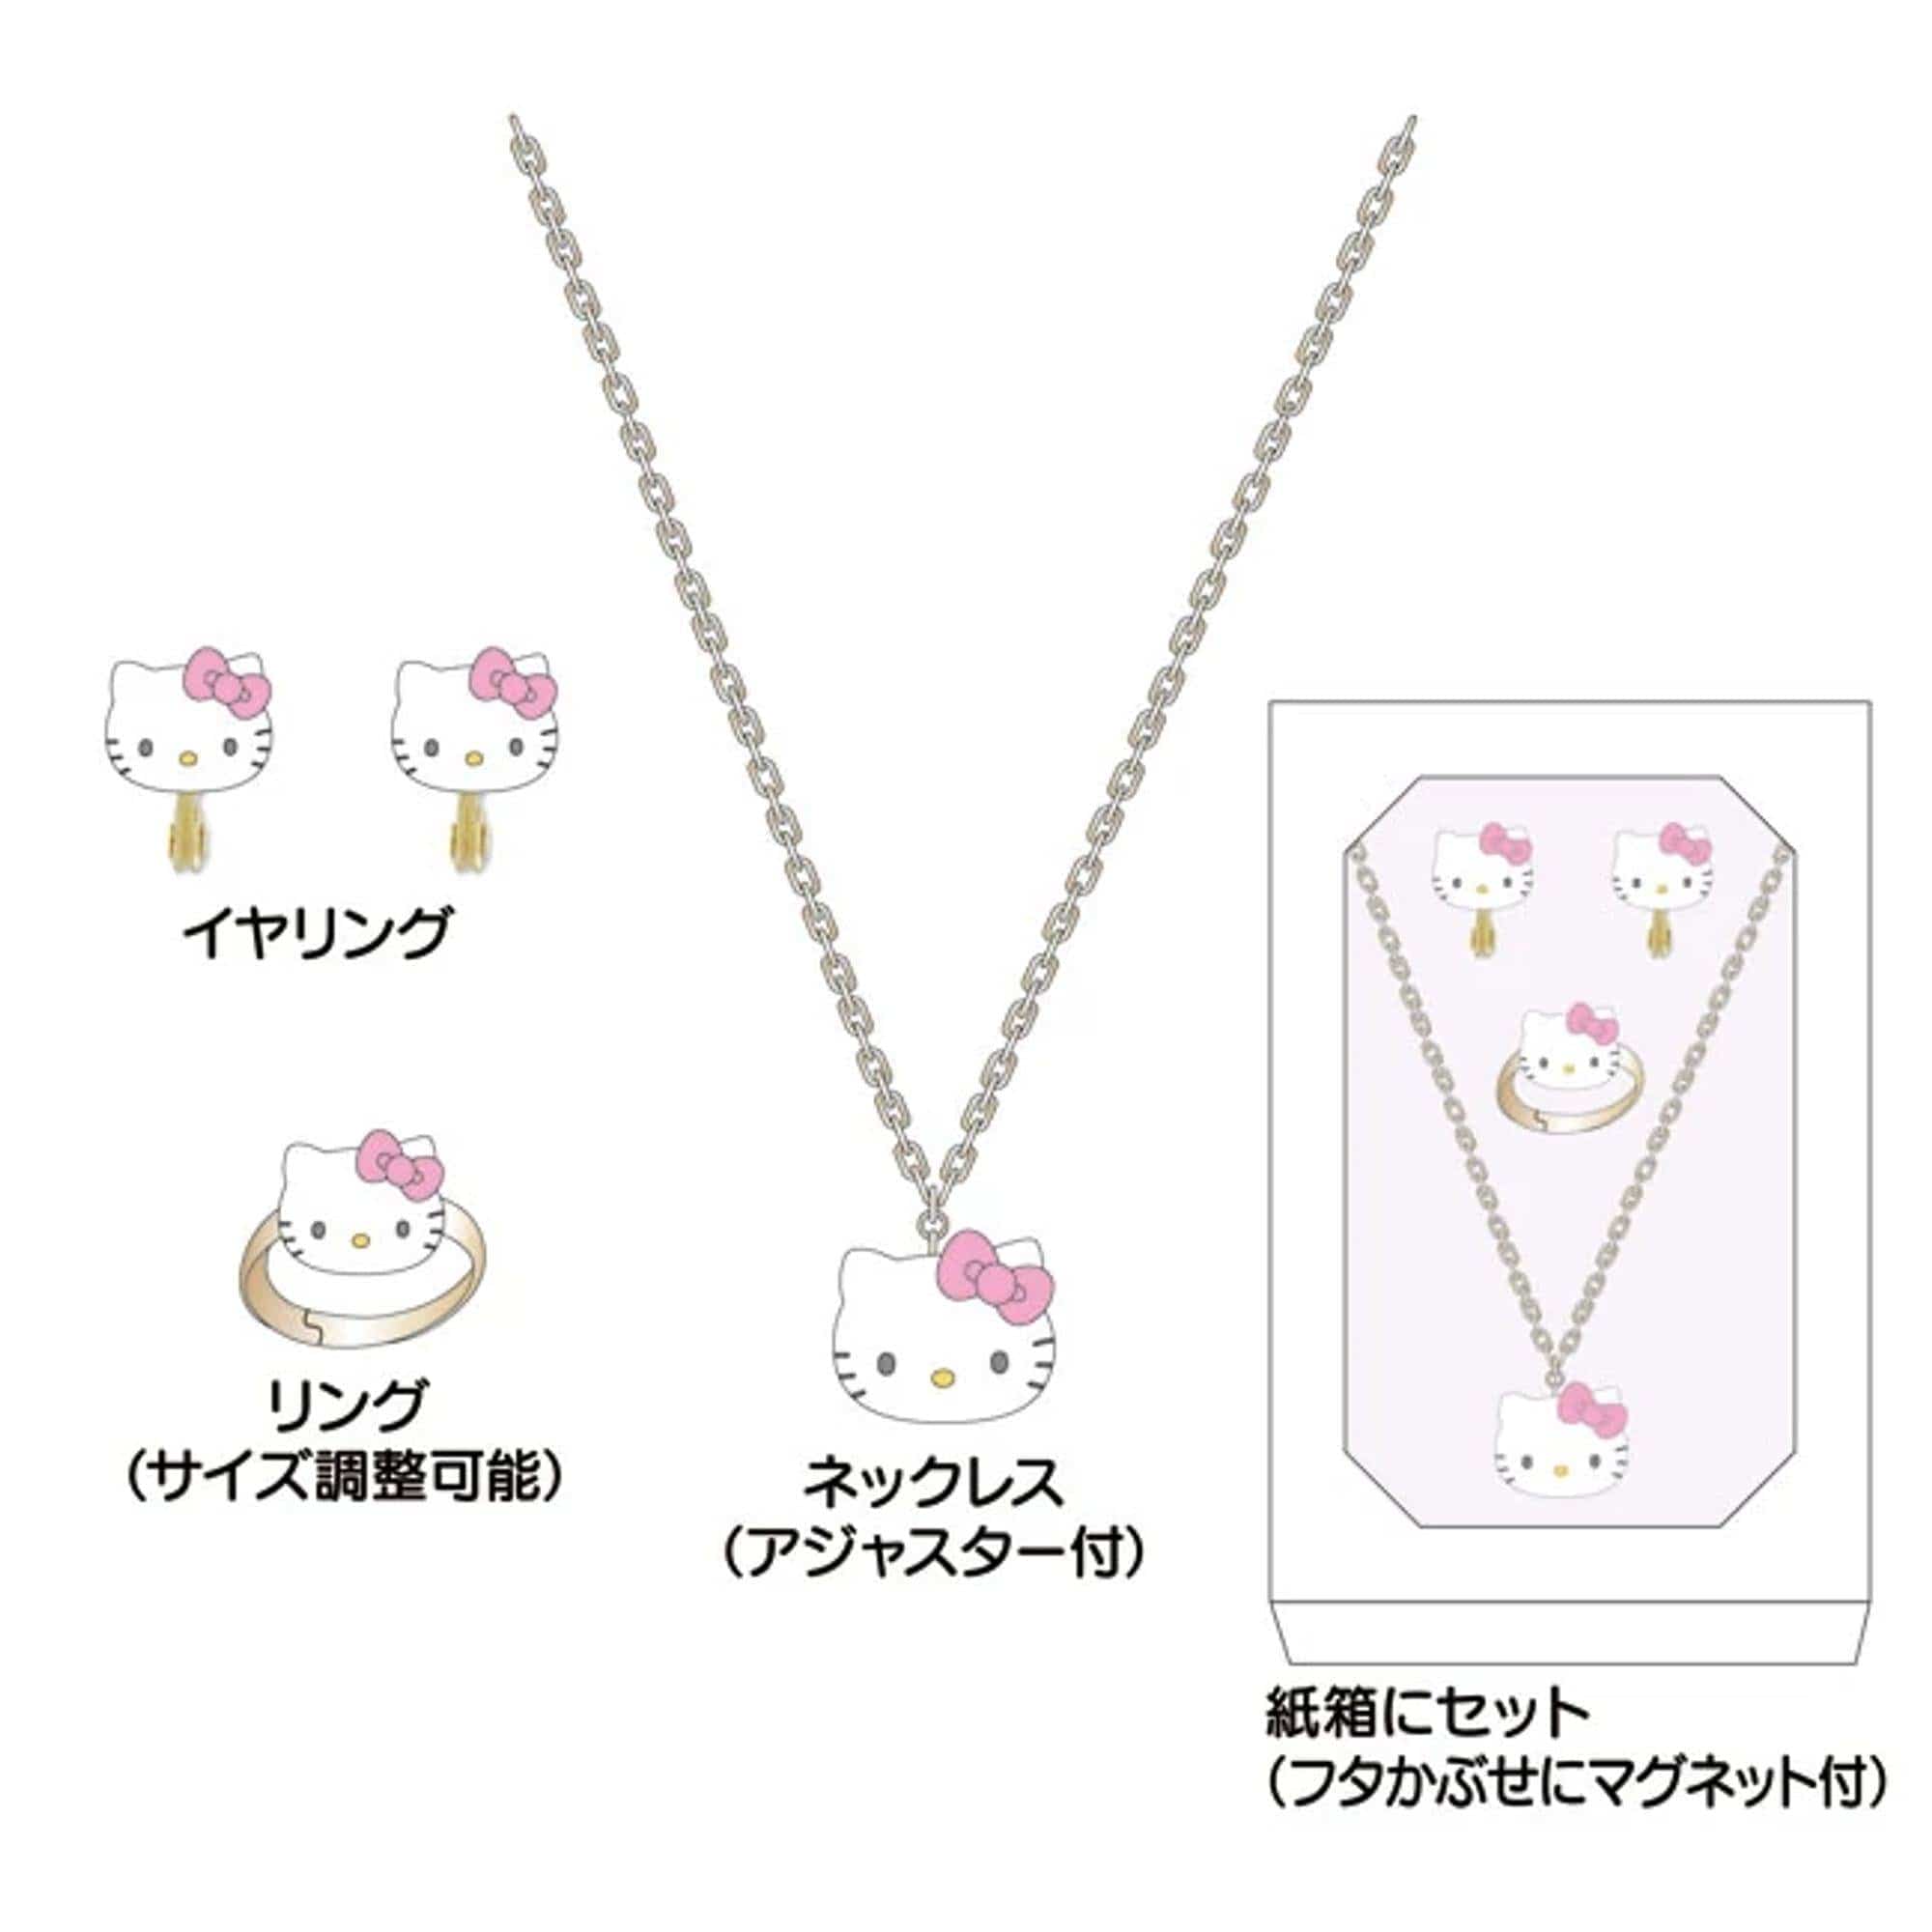 SANRIO Hello Kitty Jewelry Collection Set Necklace and Earring NISP